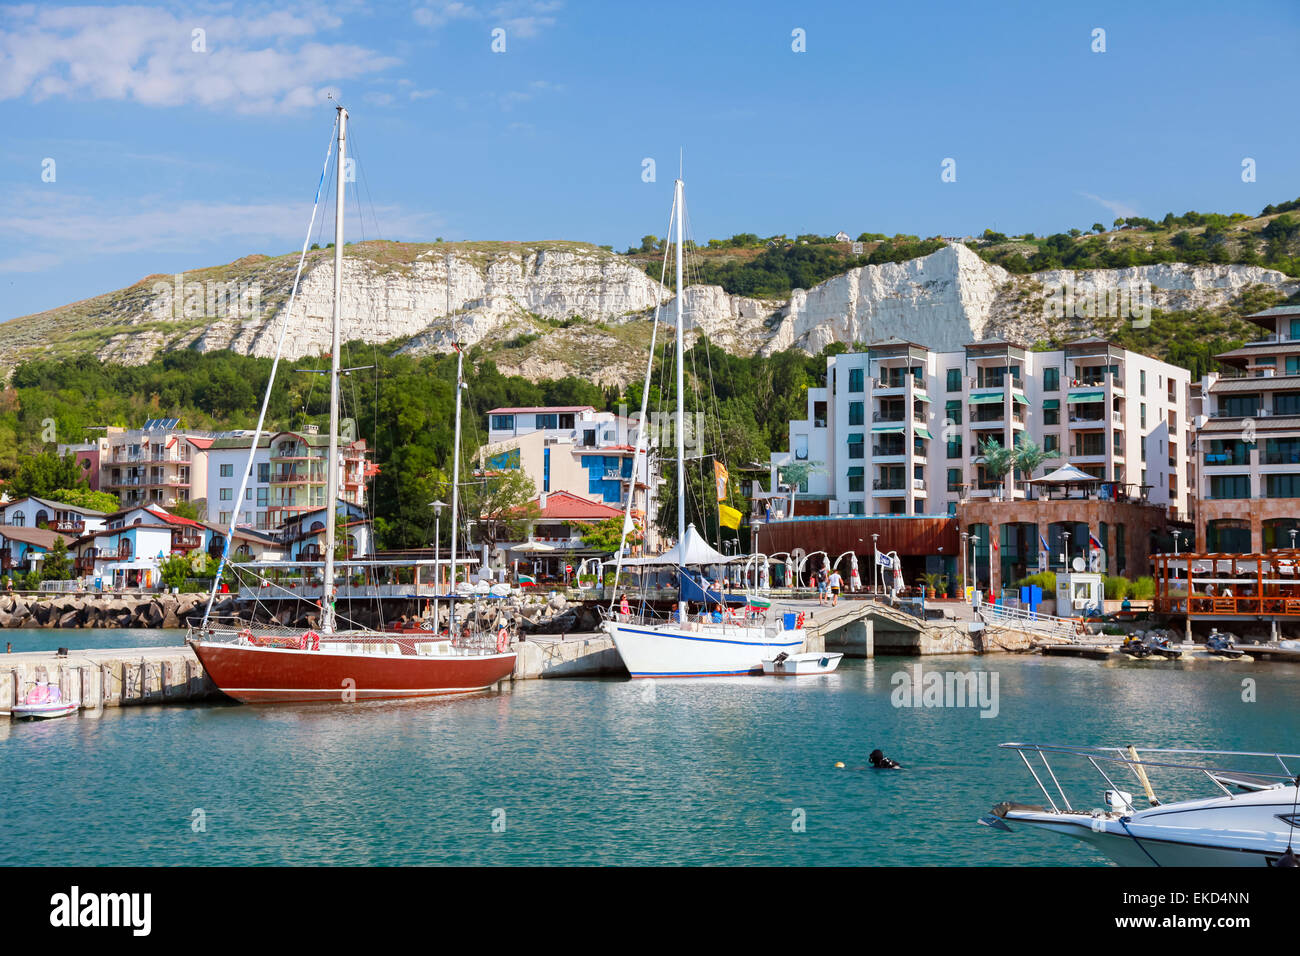 Yachts and pleasure motor boats are moored in bay of Balchik, Bulgaria Stock Photo